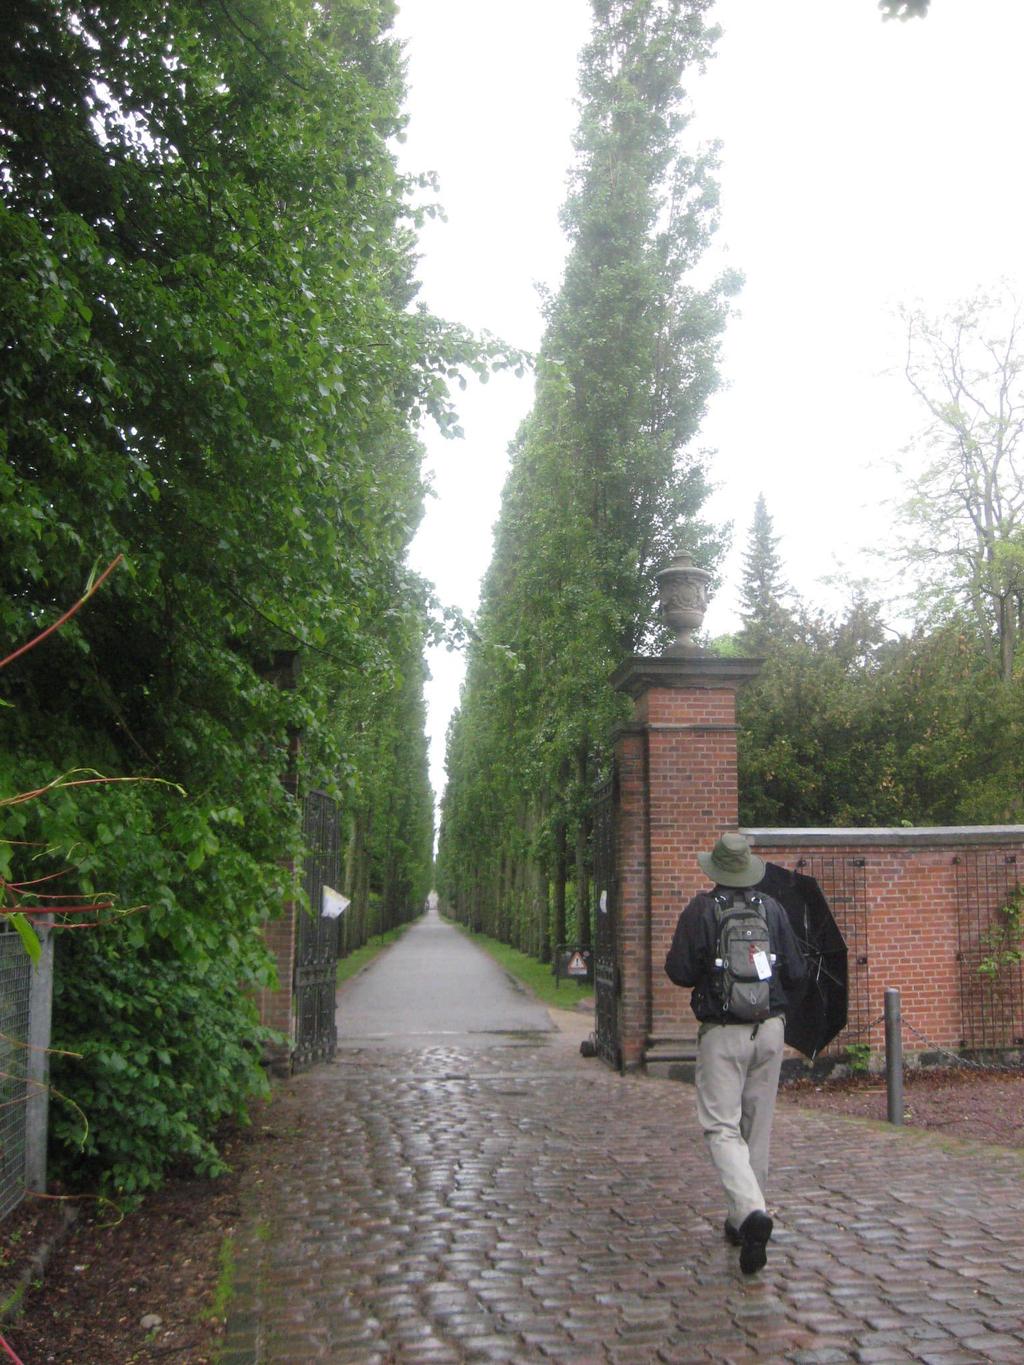 -by the time we reached Assistens Kierkegaard where he and many of Copenhagen